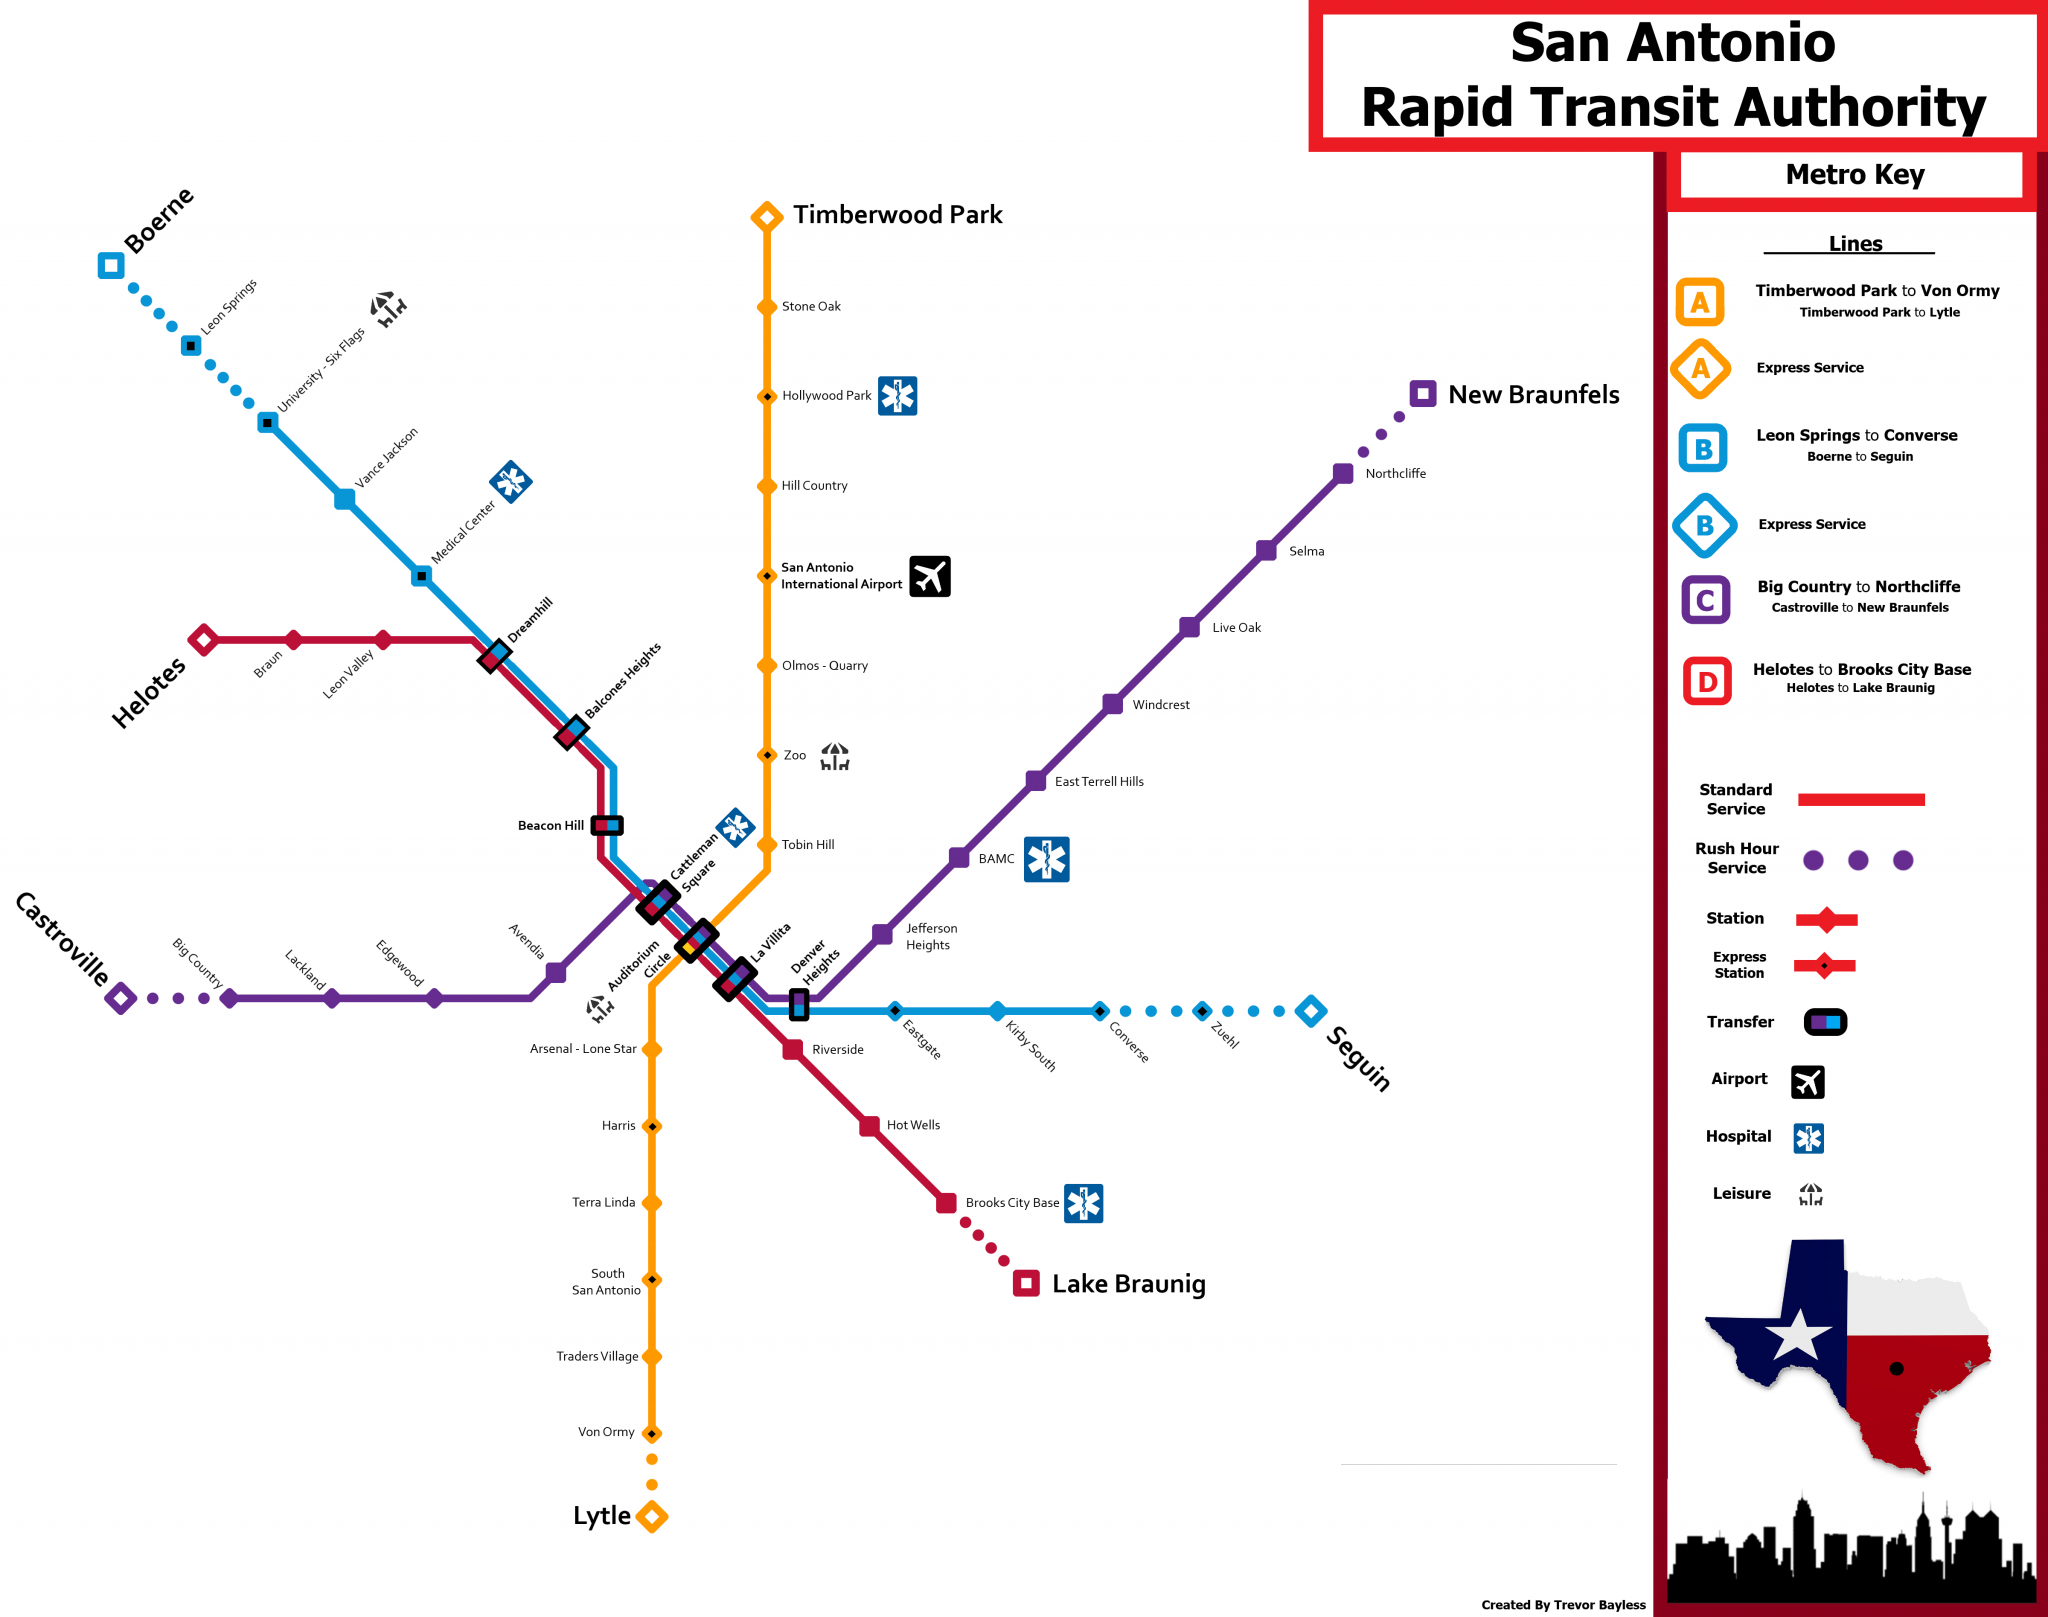 A train from Southtown to the airport? Here's a map of a potential San  Antonio metro system.